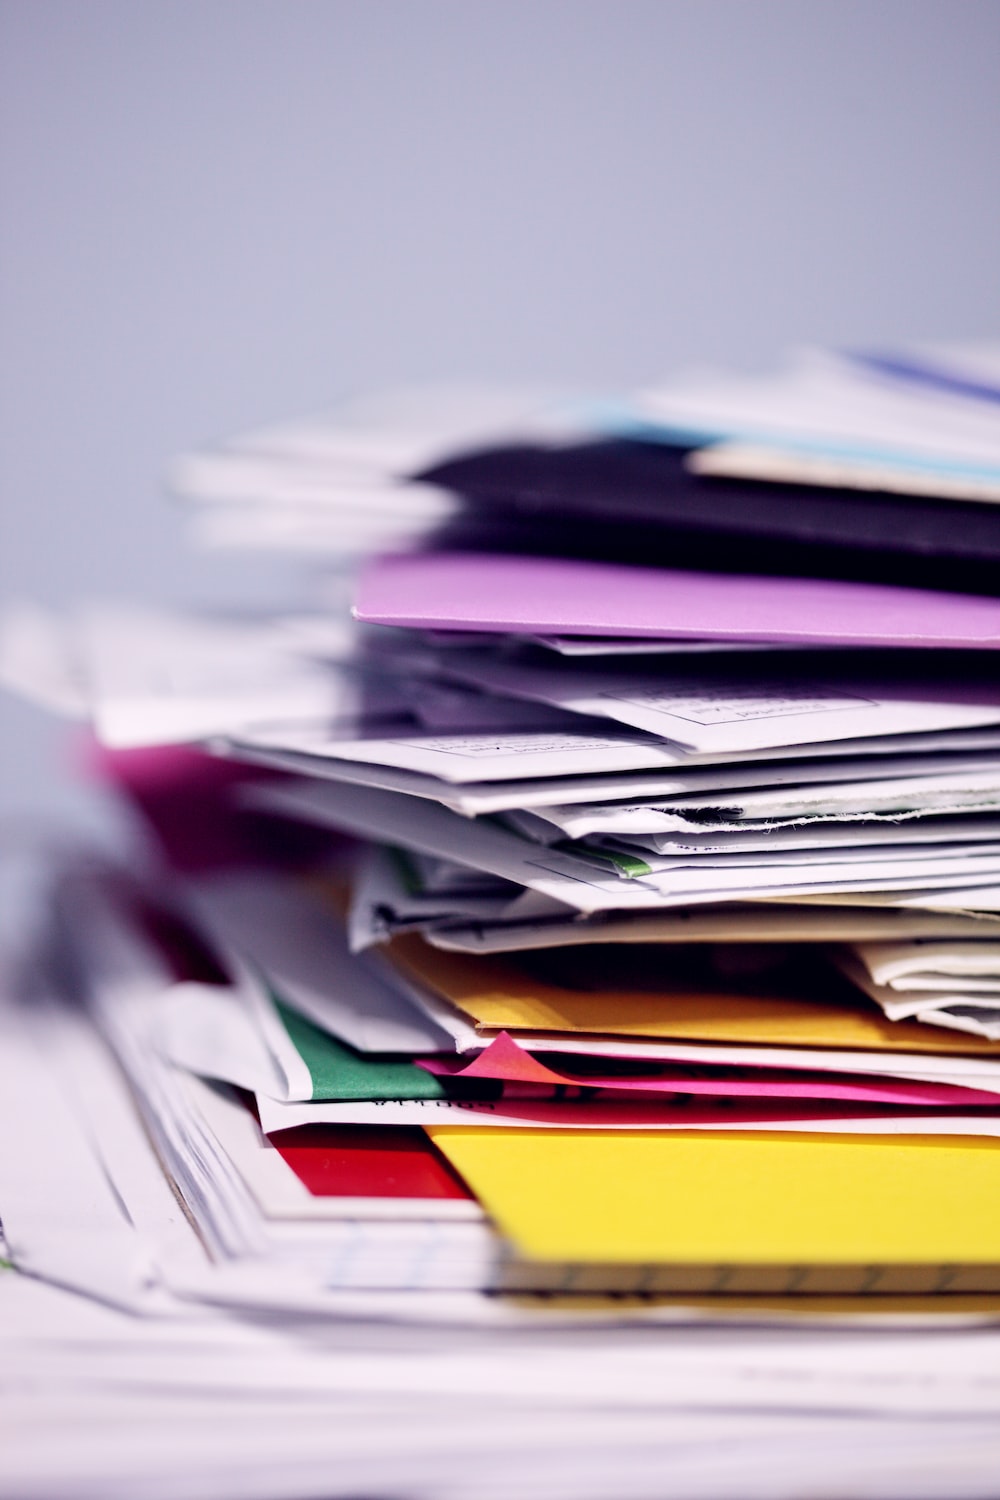 How can I declutter my home paperwork?